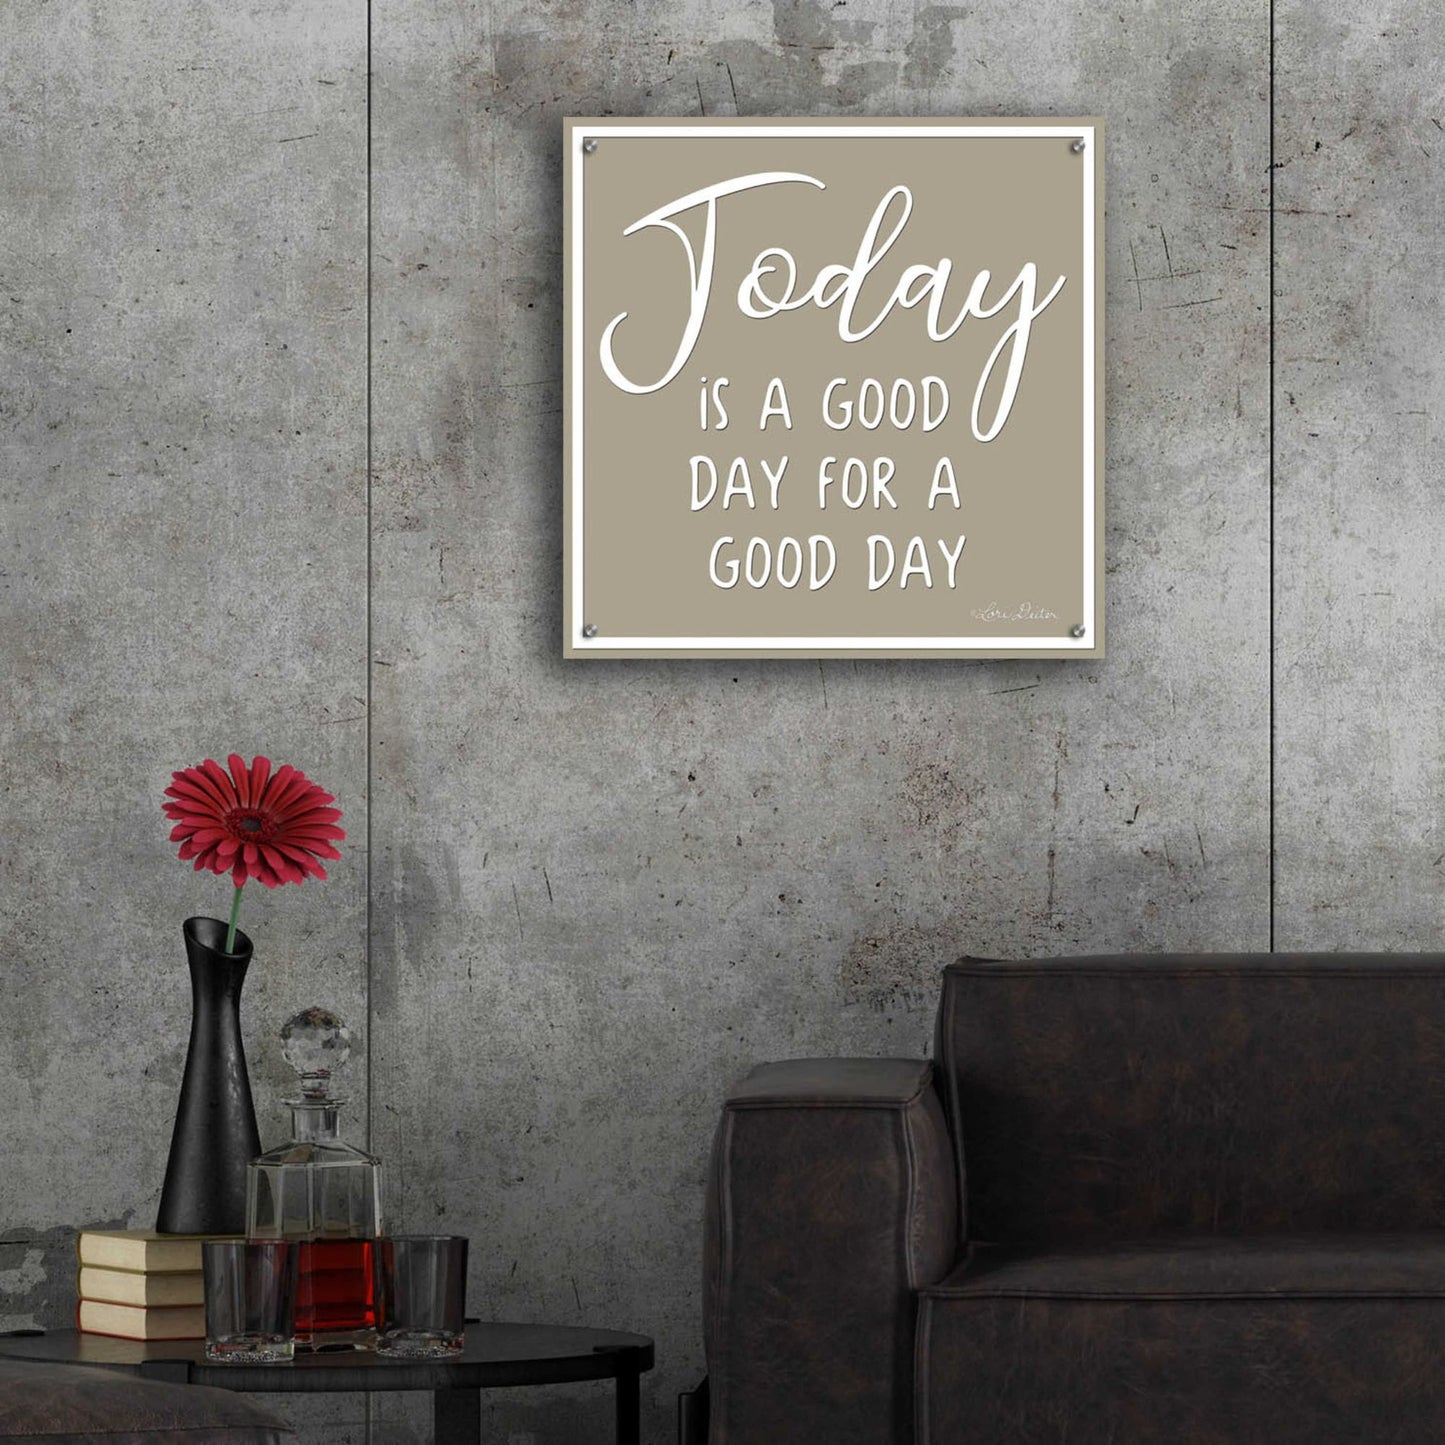 Epic Art 'Today is a Good Day' by Lori Deiter, Acrylic Glass Wall Art,24x24